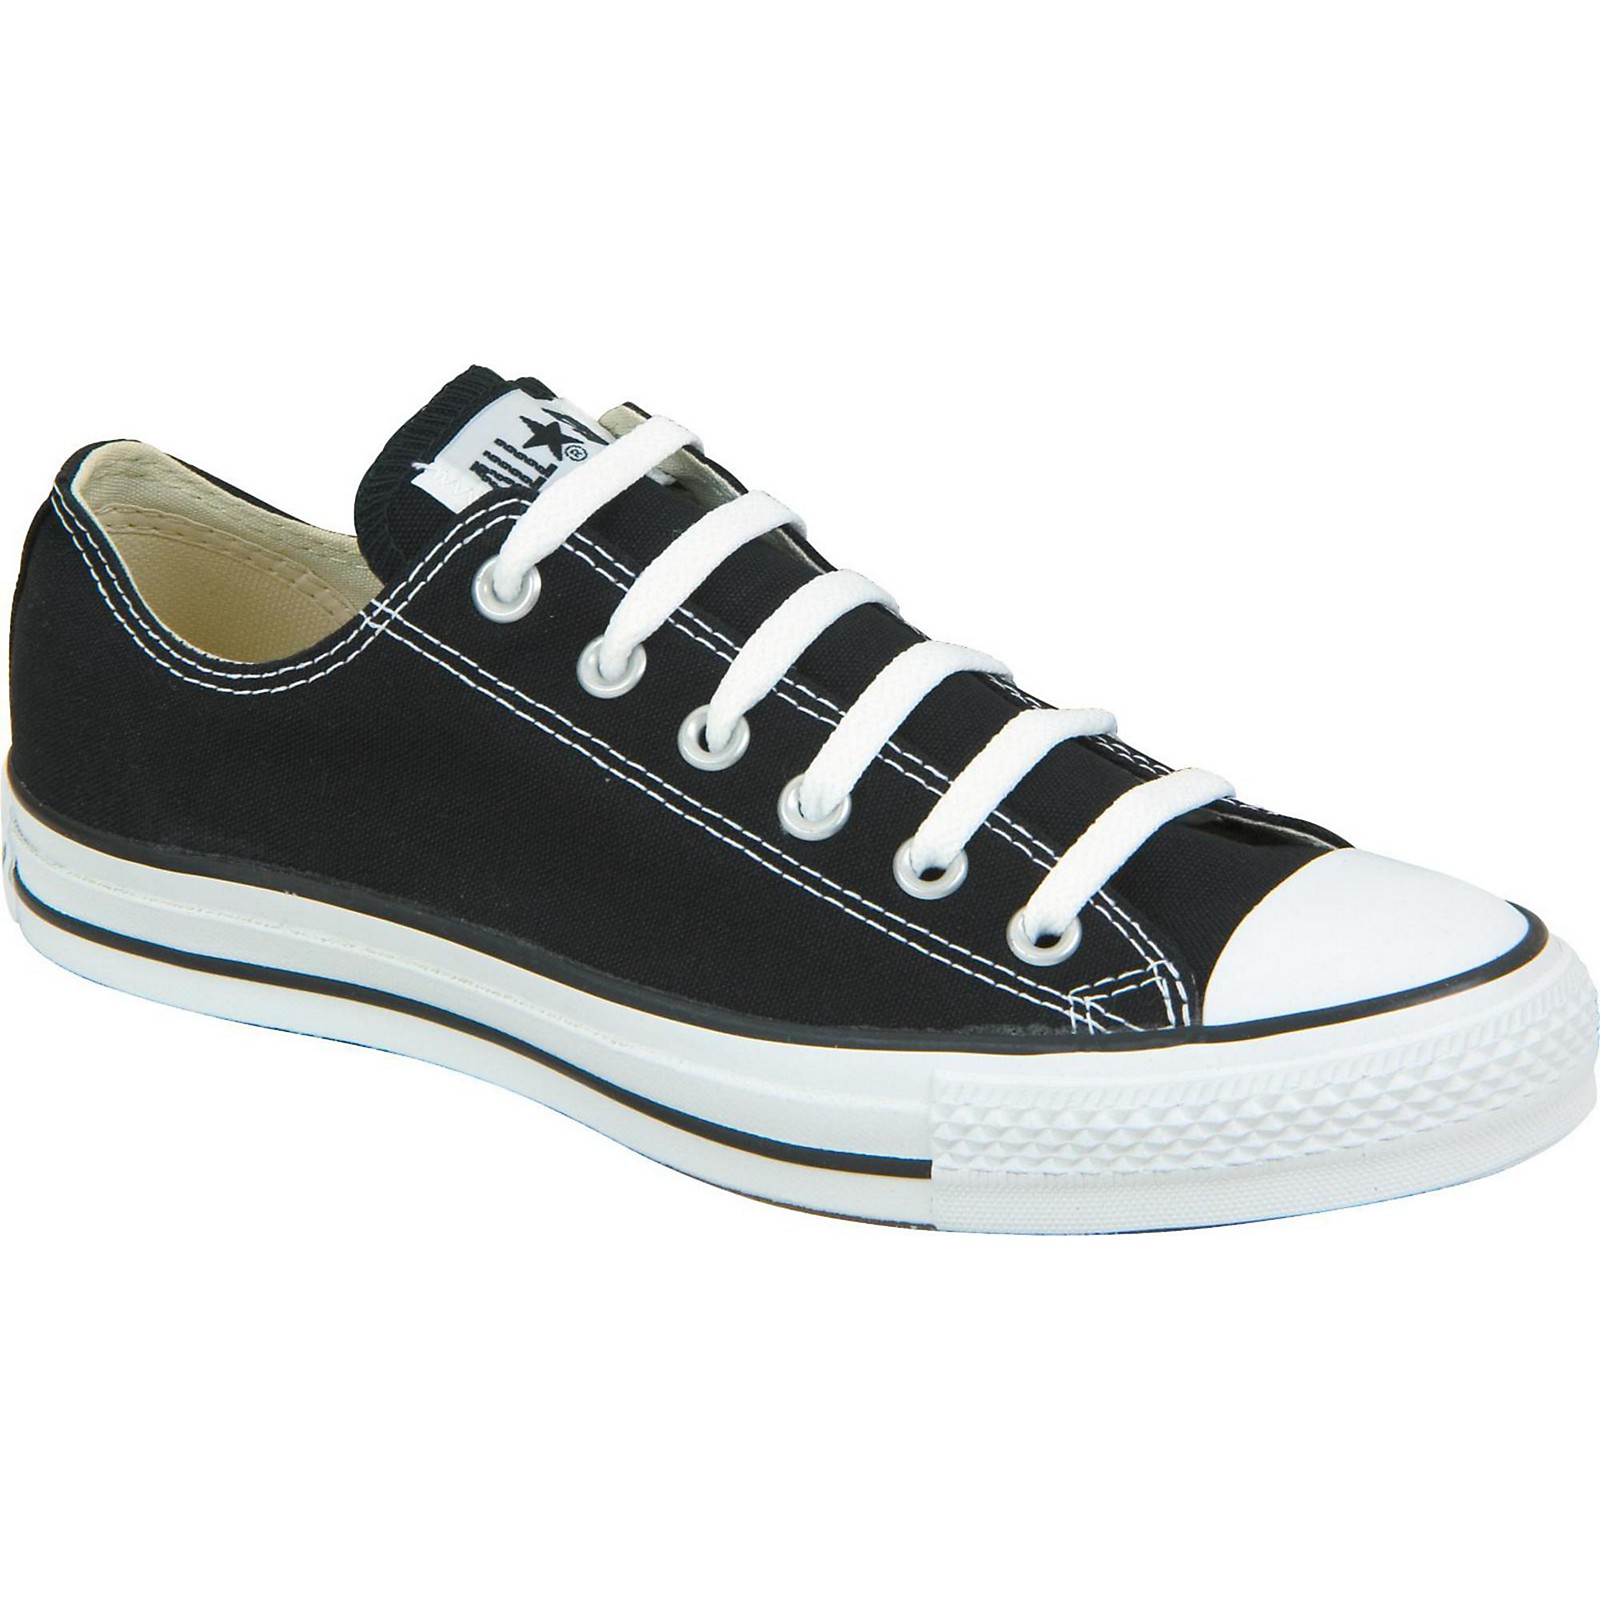 Converse Chuck Taylor All Star Core Oxford Low-Top Black | Musician's - Converse Chuck Taylor Low Top